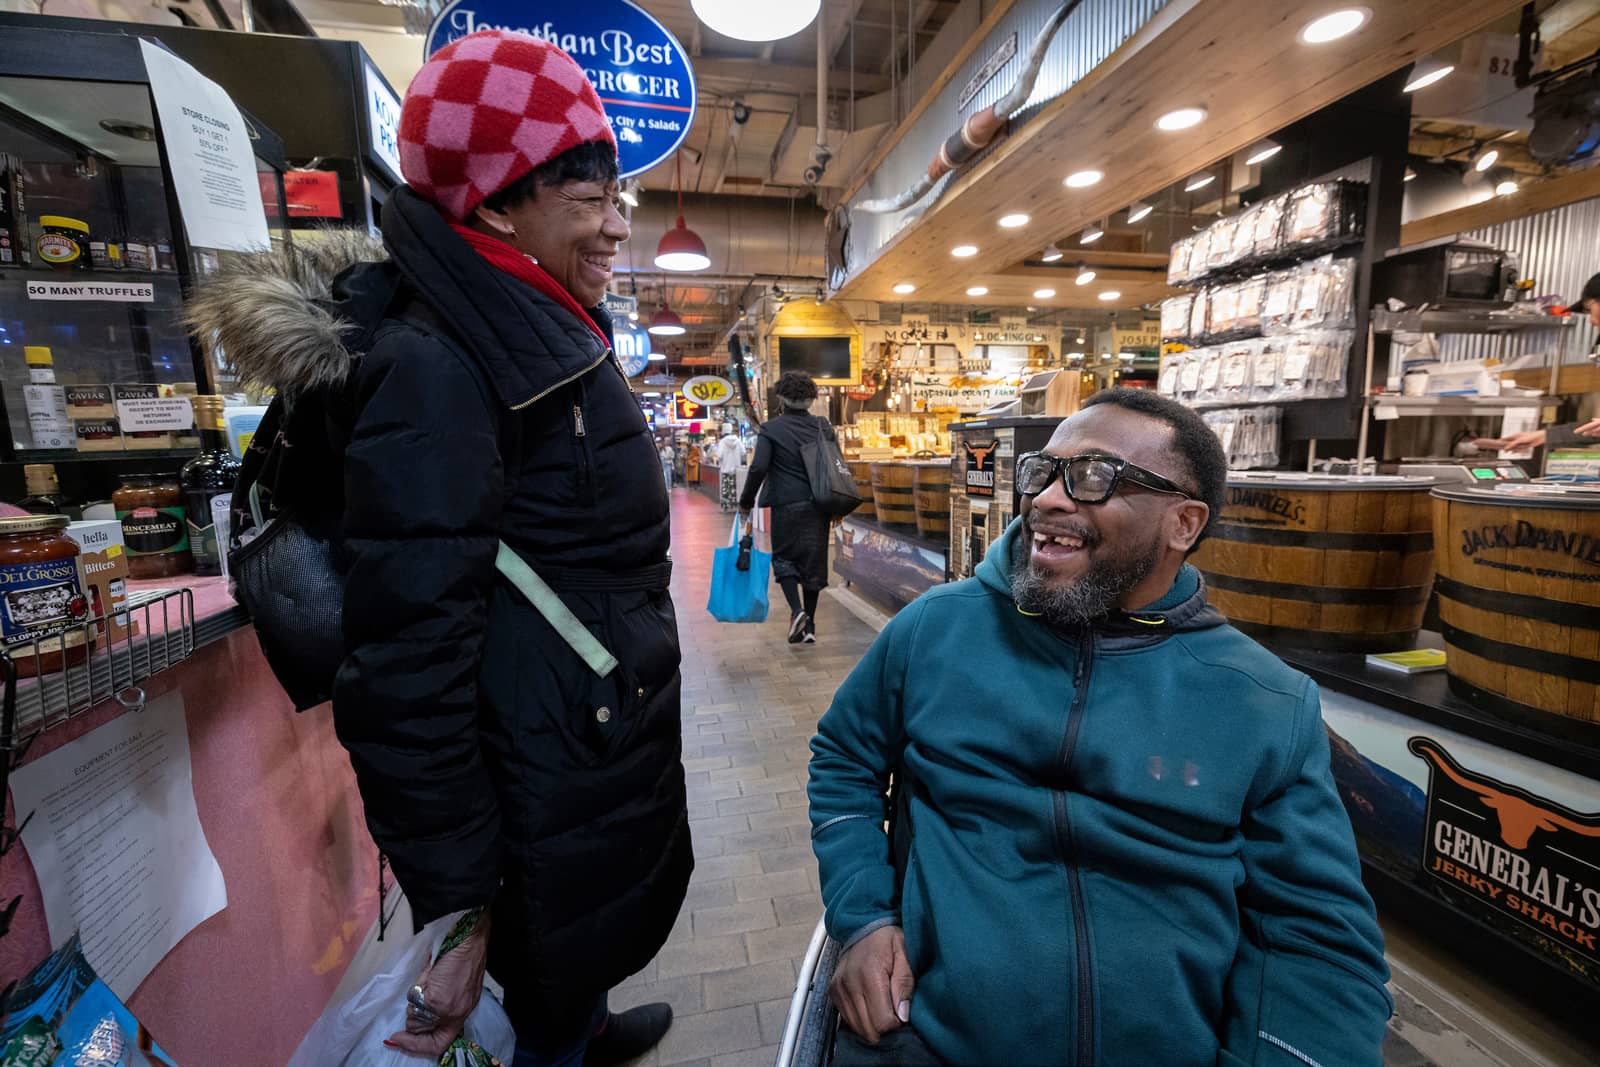 Rodney, a Black man using a wheelchair, laughs with another shopper in Reading Terminal Market